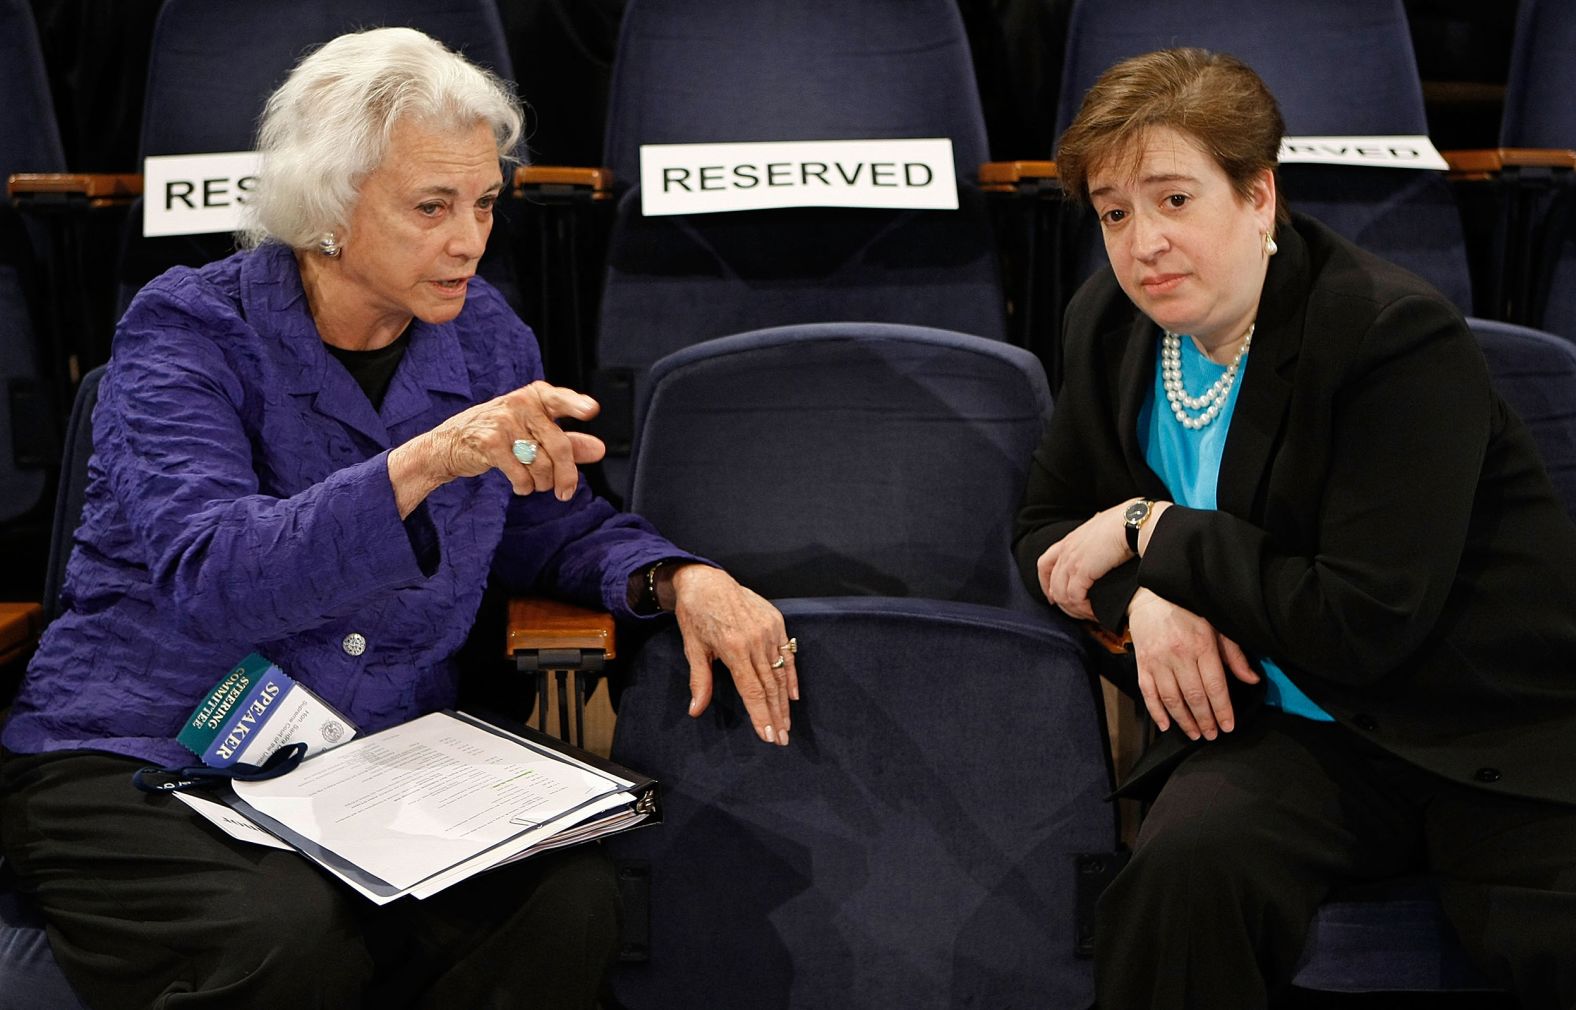 O'Connor talks with Solicitor General Elena Kagan during a forum in Washington, DC, in 2009. Kagan was nominated to the Supreme Court in 2010.